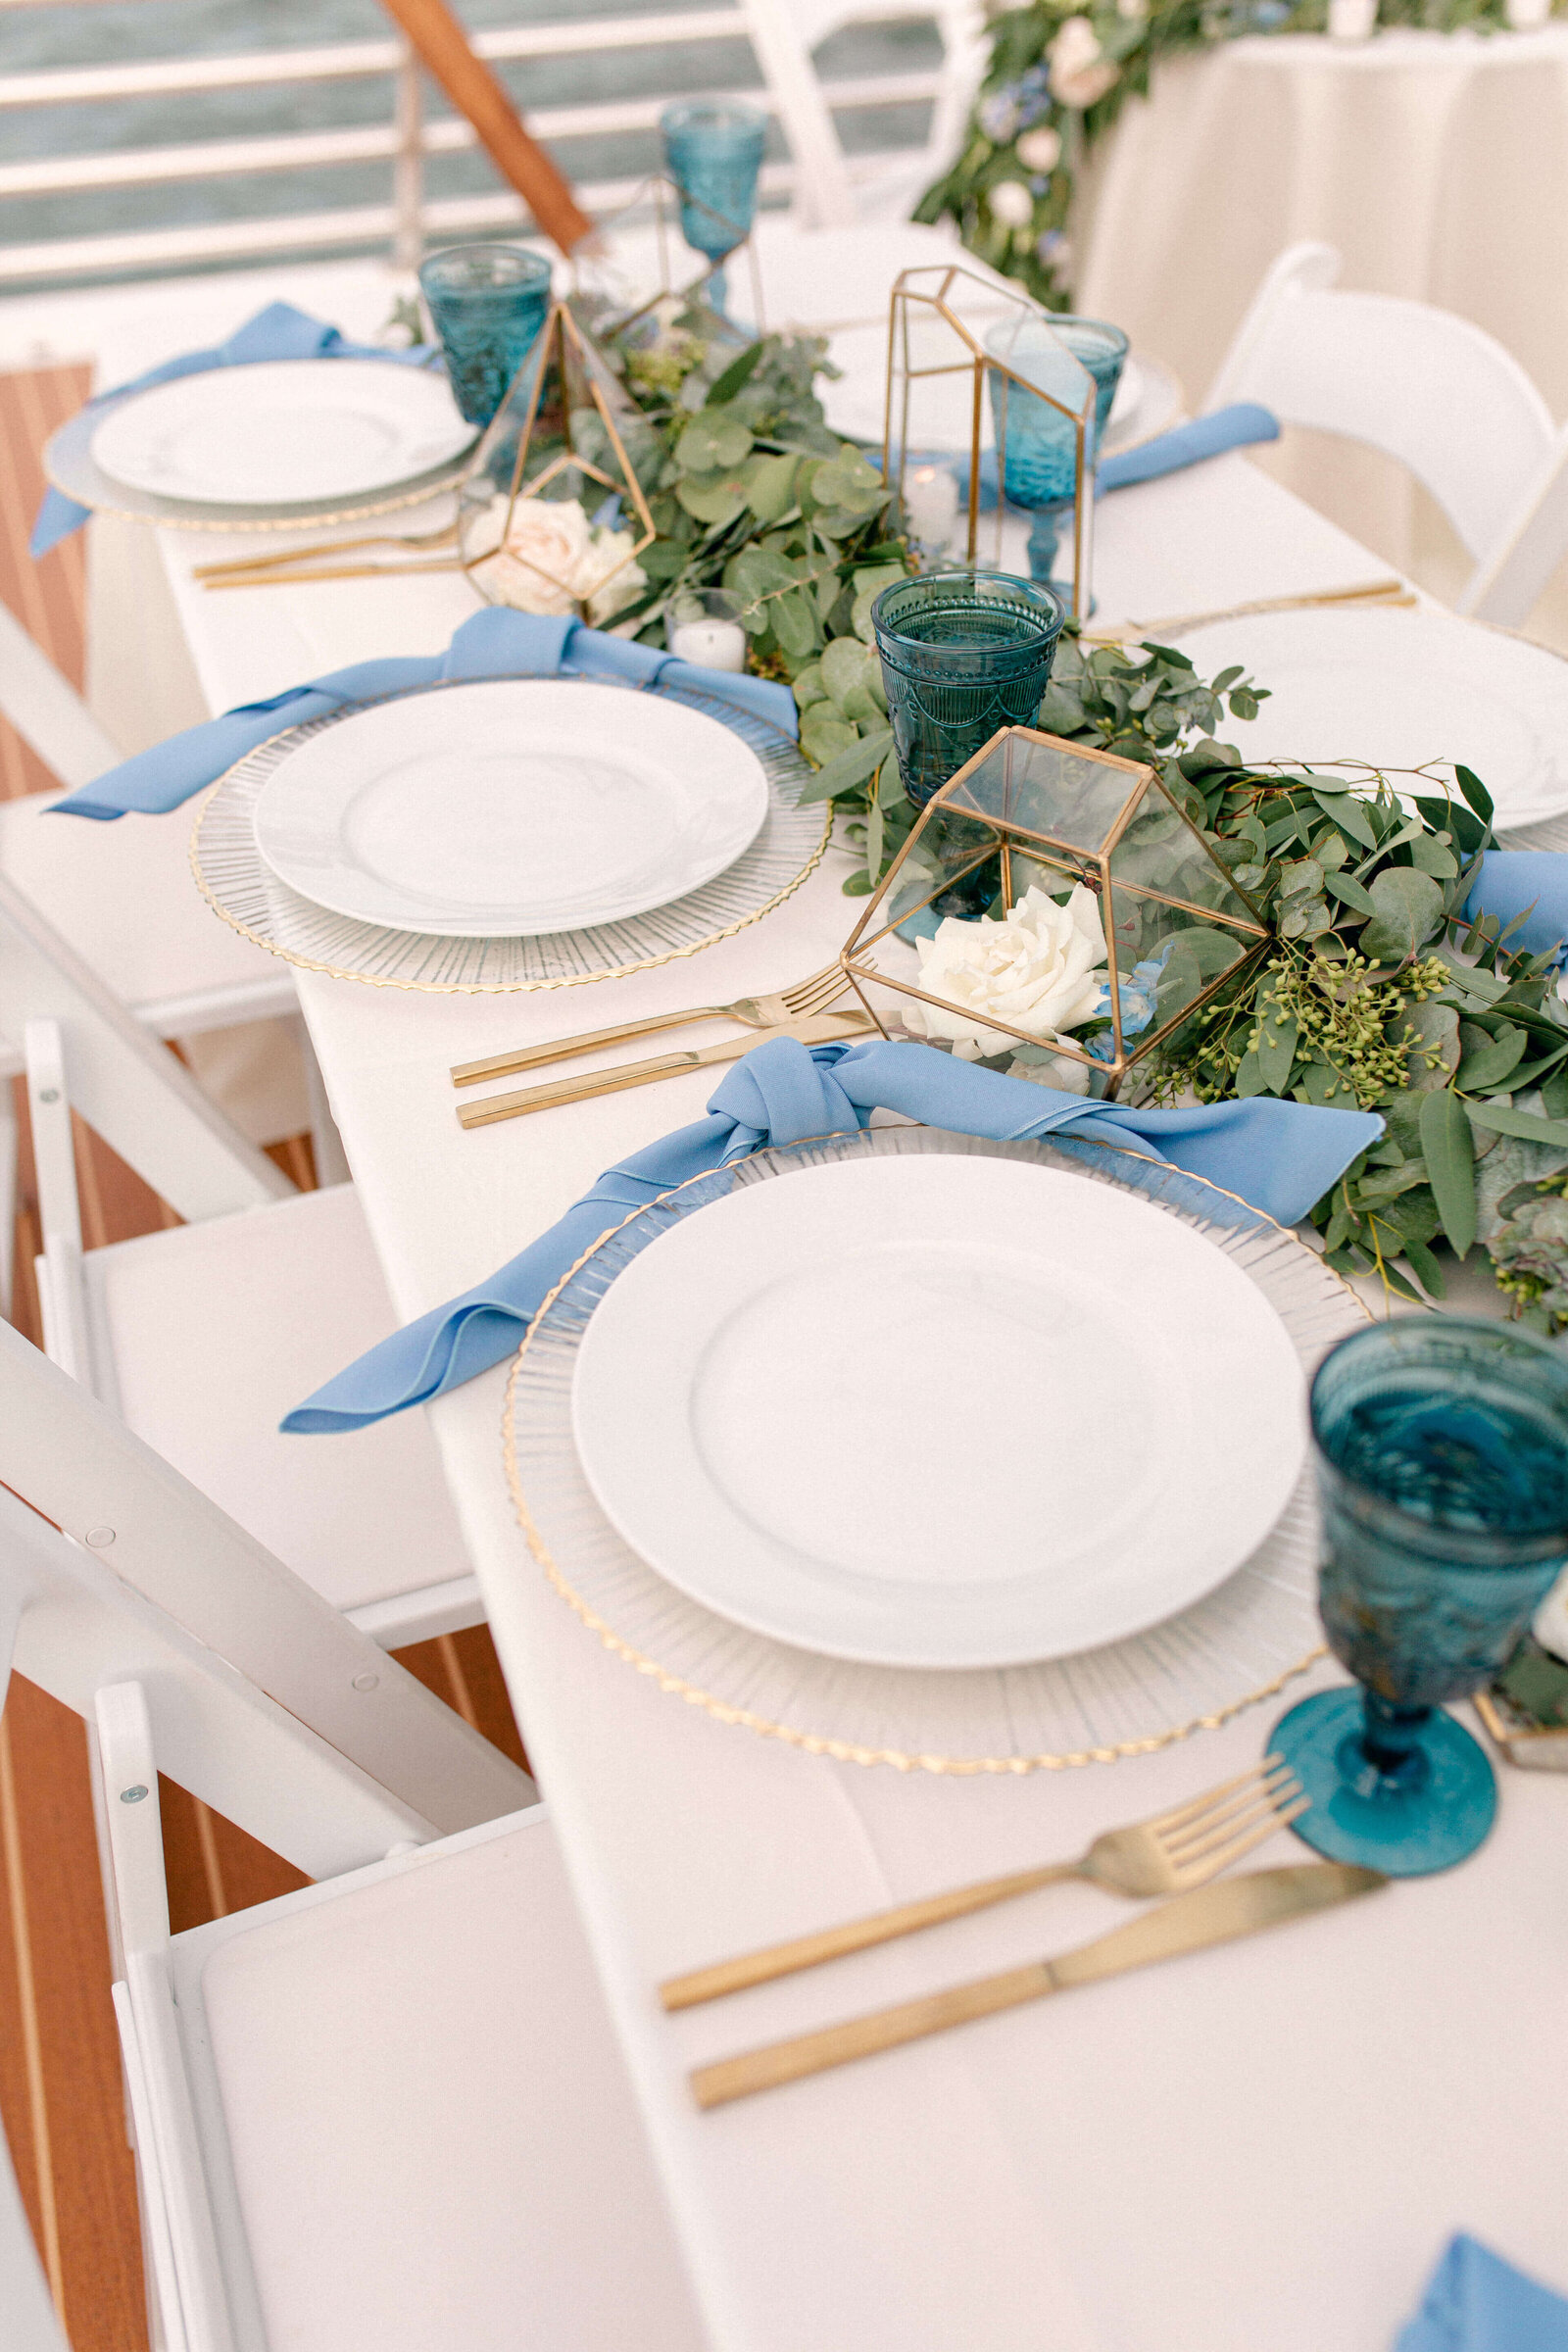 Virginia-Beach-Wedding-Planners-Sincerely-Jane-Events-8535